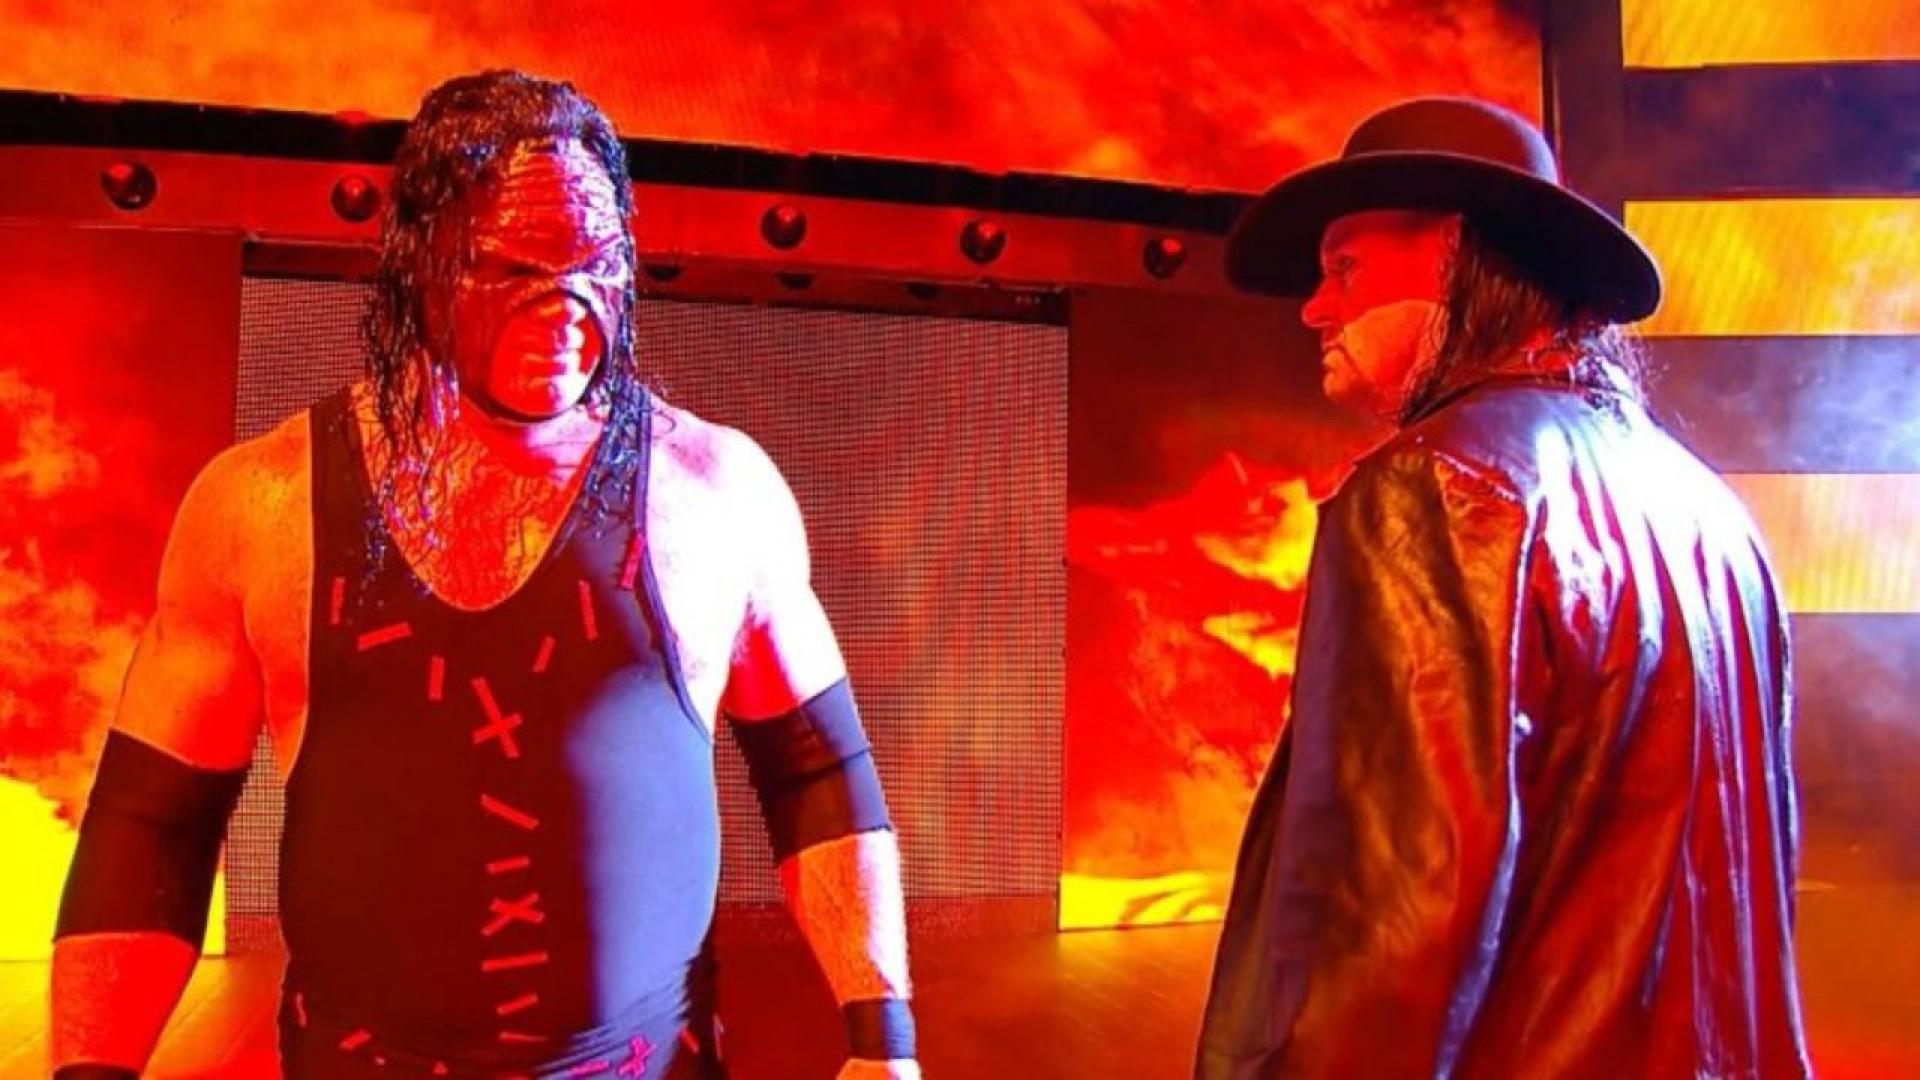 Kane discusses how he and The Undertaker are introverts